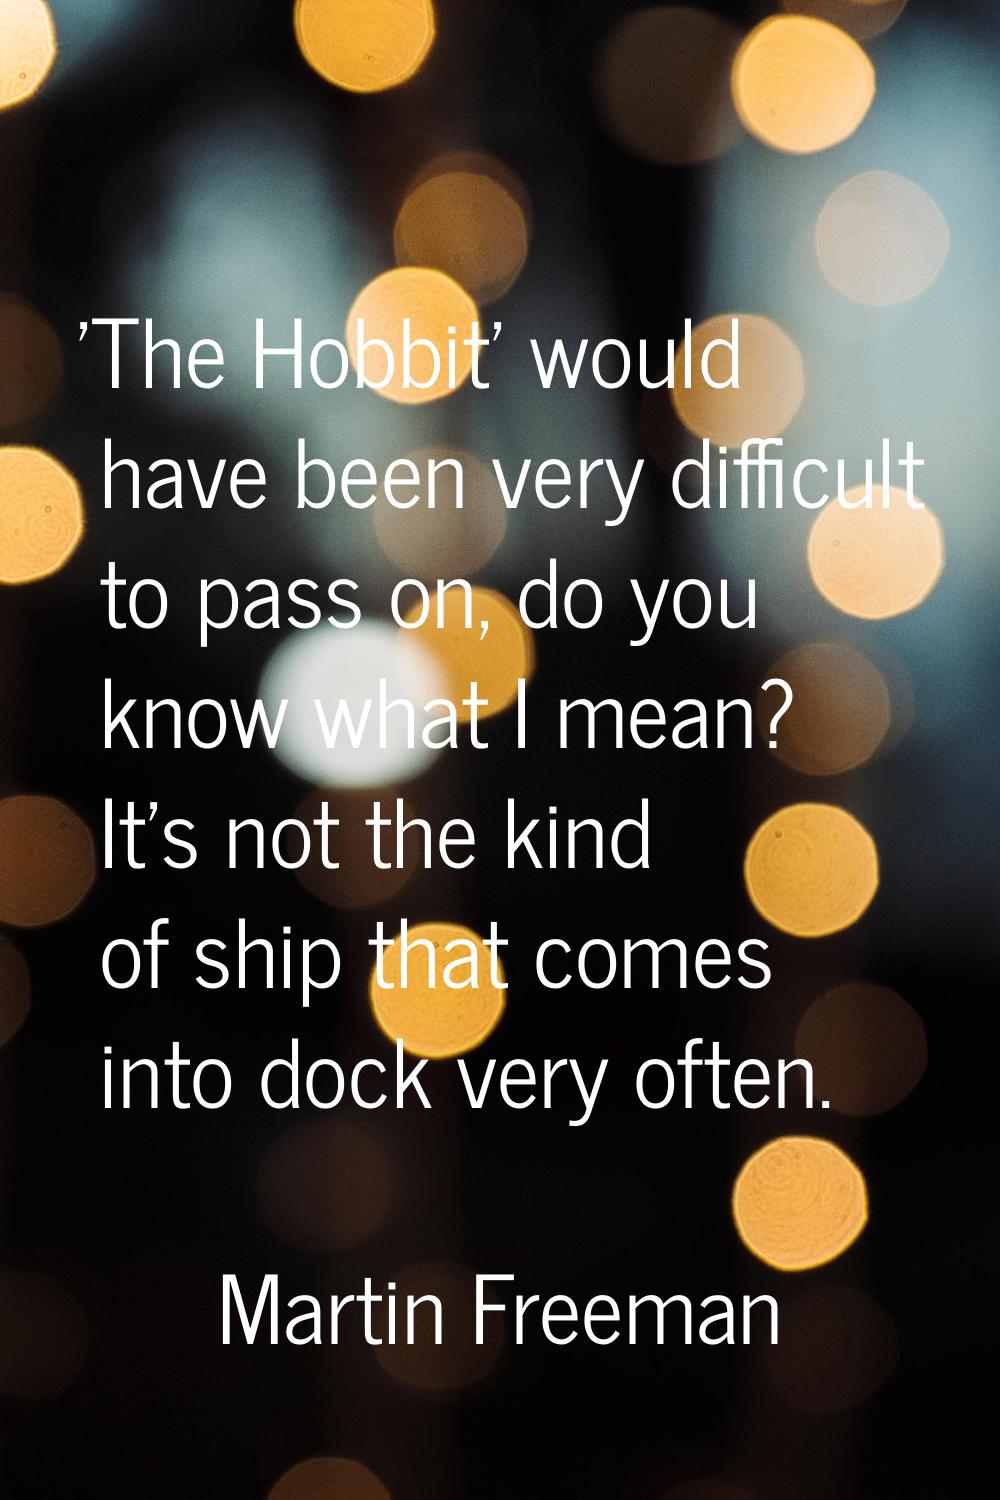 'The Hobbit' would have been very difficult to pass on, do you know what I mean? It's not the kind 